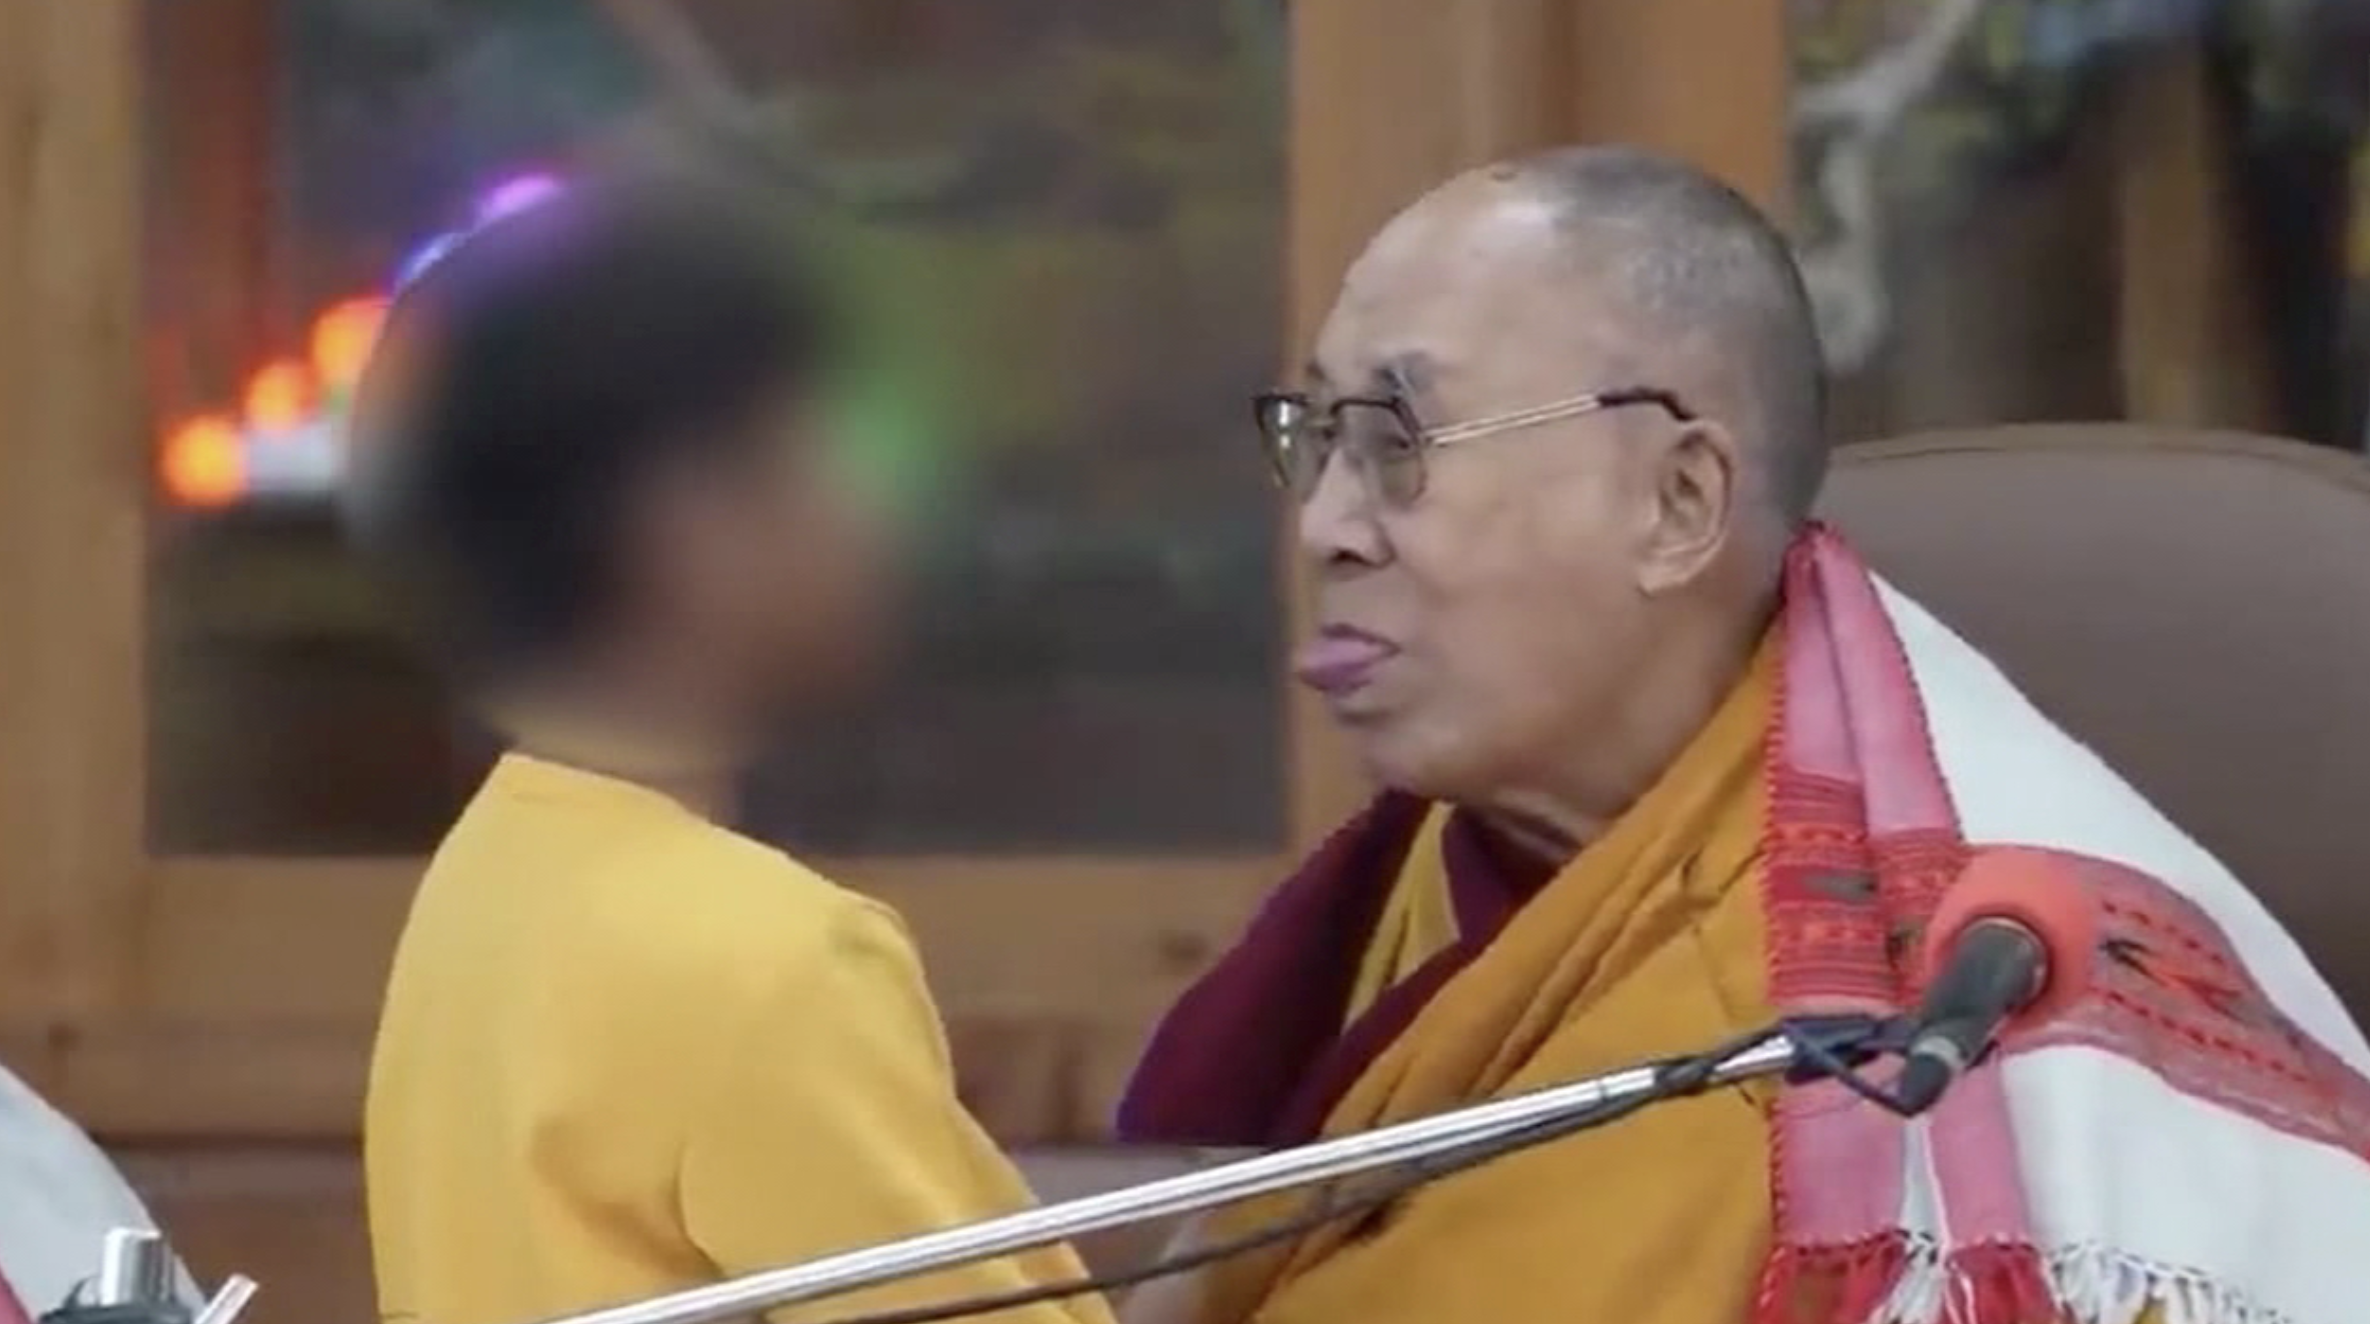 Dalai Lama Issues Apology After Weirdly Kissing Little Boy And Asking Him To ‘Suck’ On His Tongue